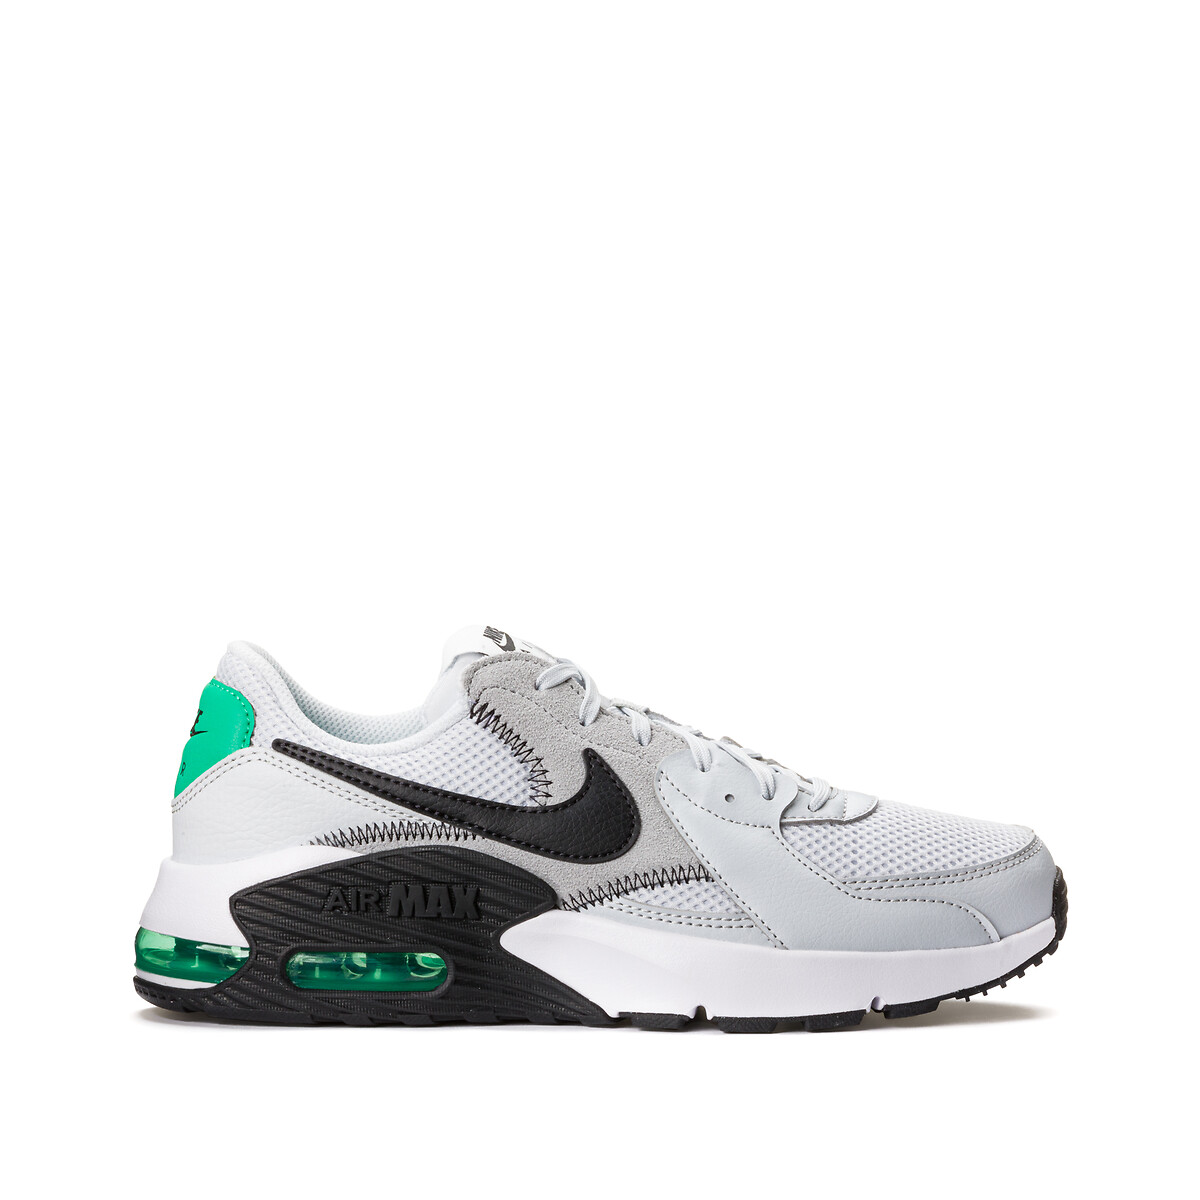 Air max classic bw homme | La Redoute